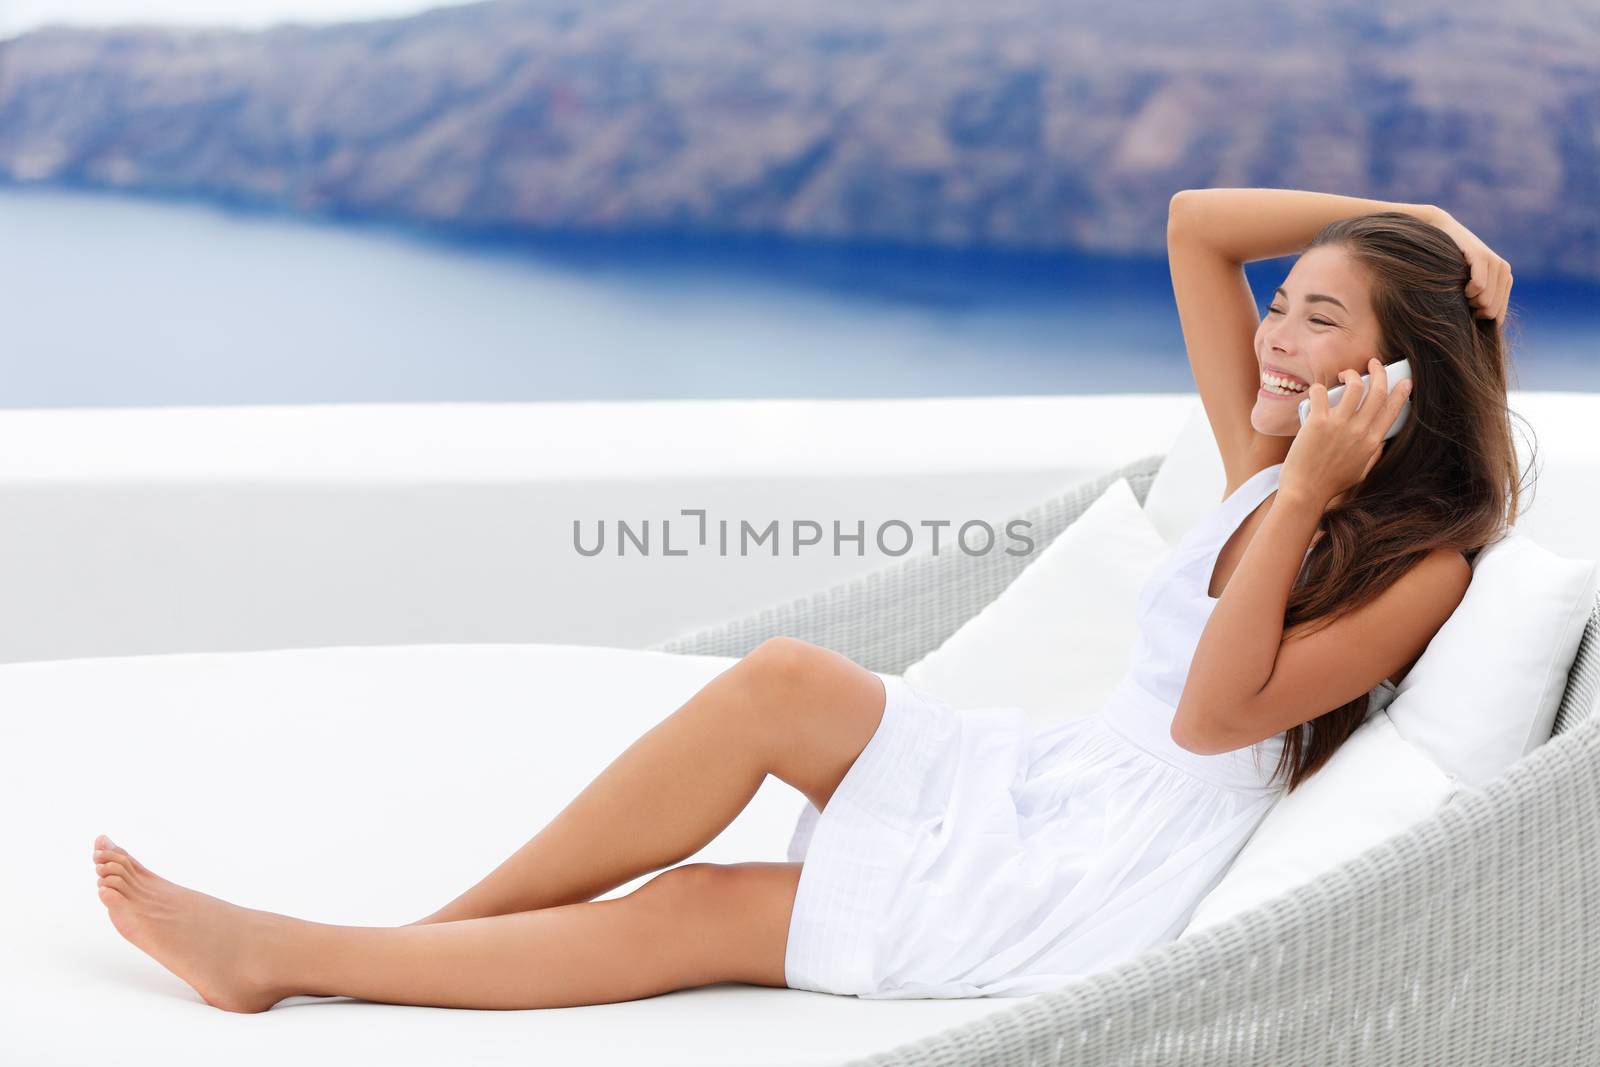 Happy young woman using smartphone while relaxing on couch. Smiling female talking on smart phone is at seaside resort terrace. Female tourist is wearing white sundress.